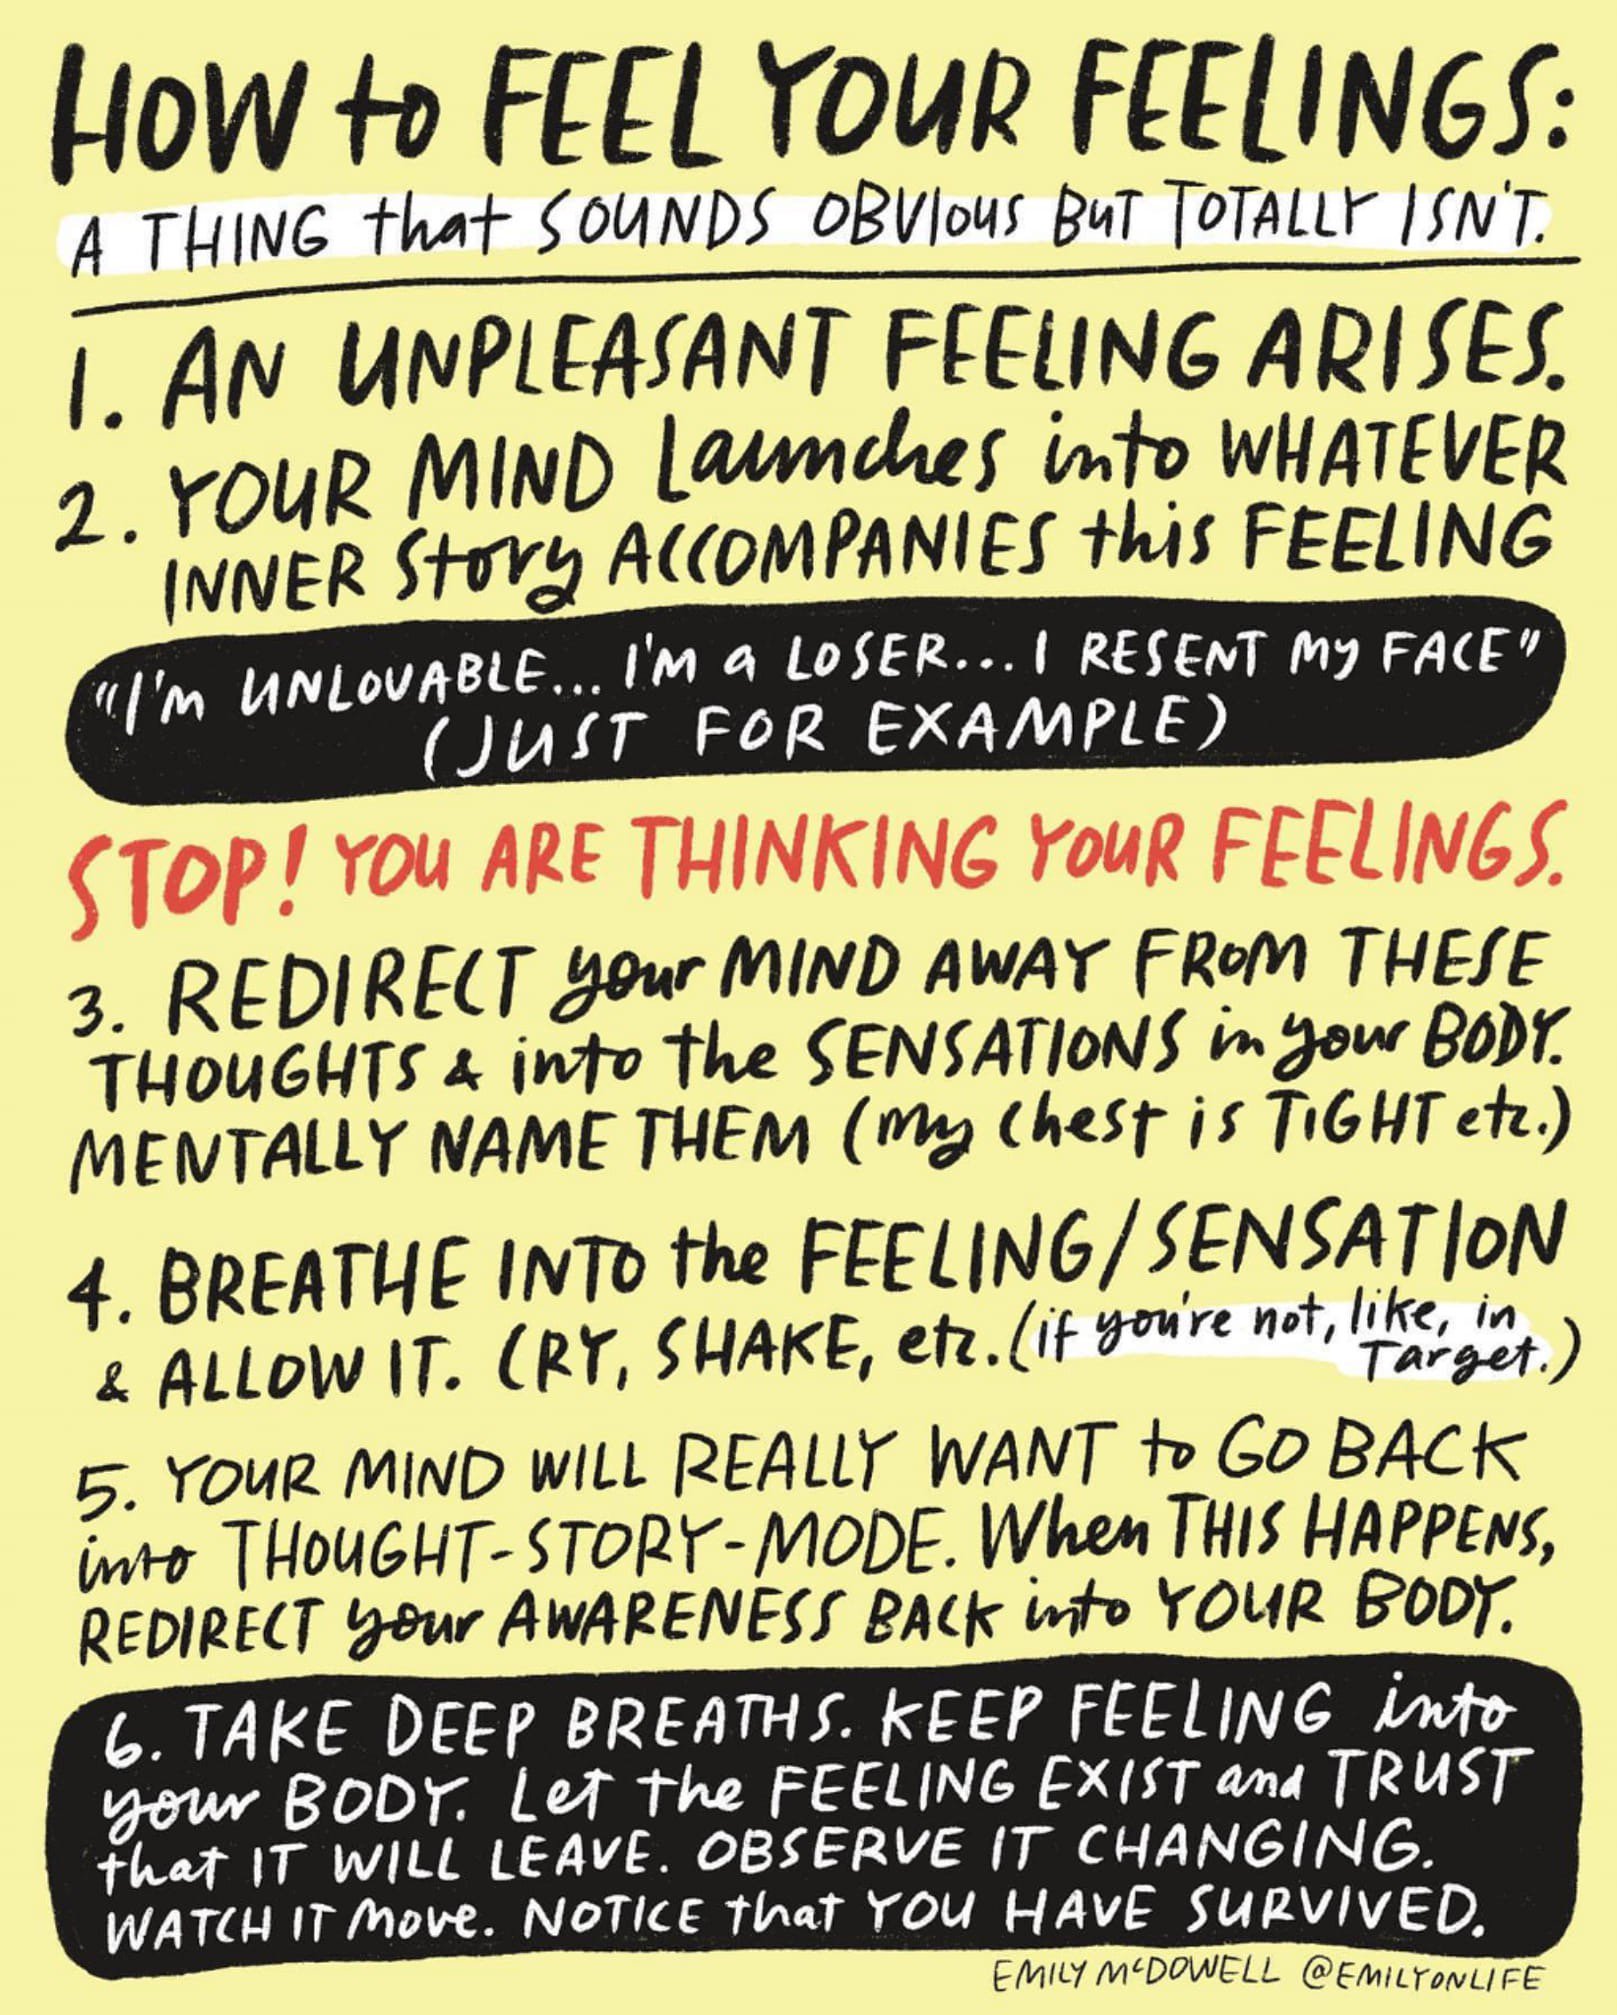 Everyday Mindfulness on X: How to feel your feelings Source: Emily  McDowell #mindfulness  / X